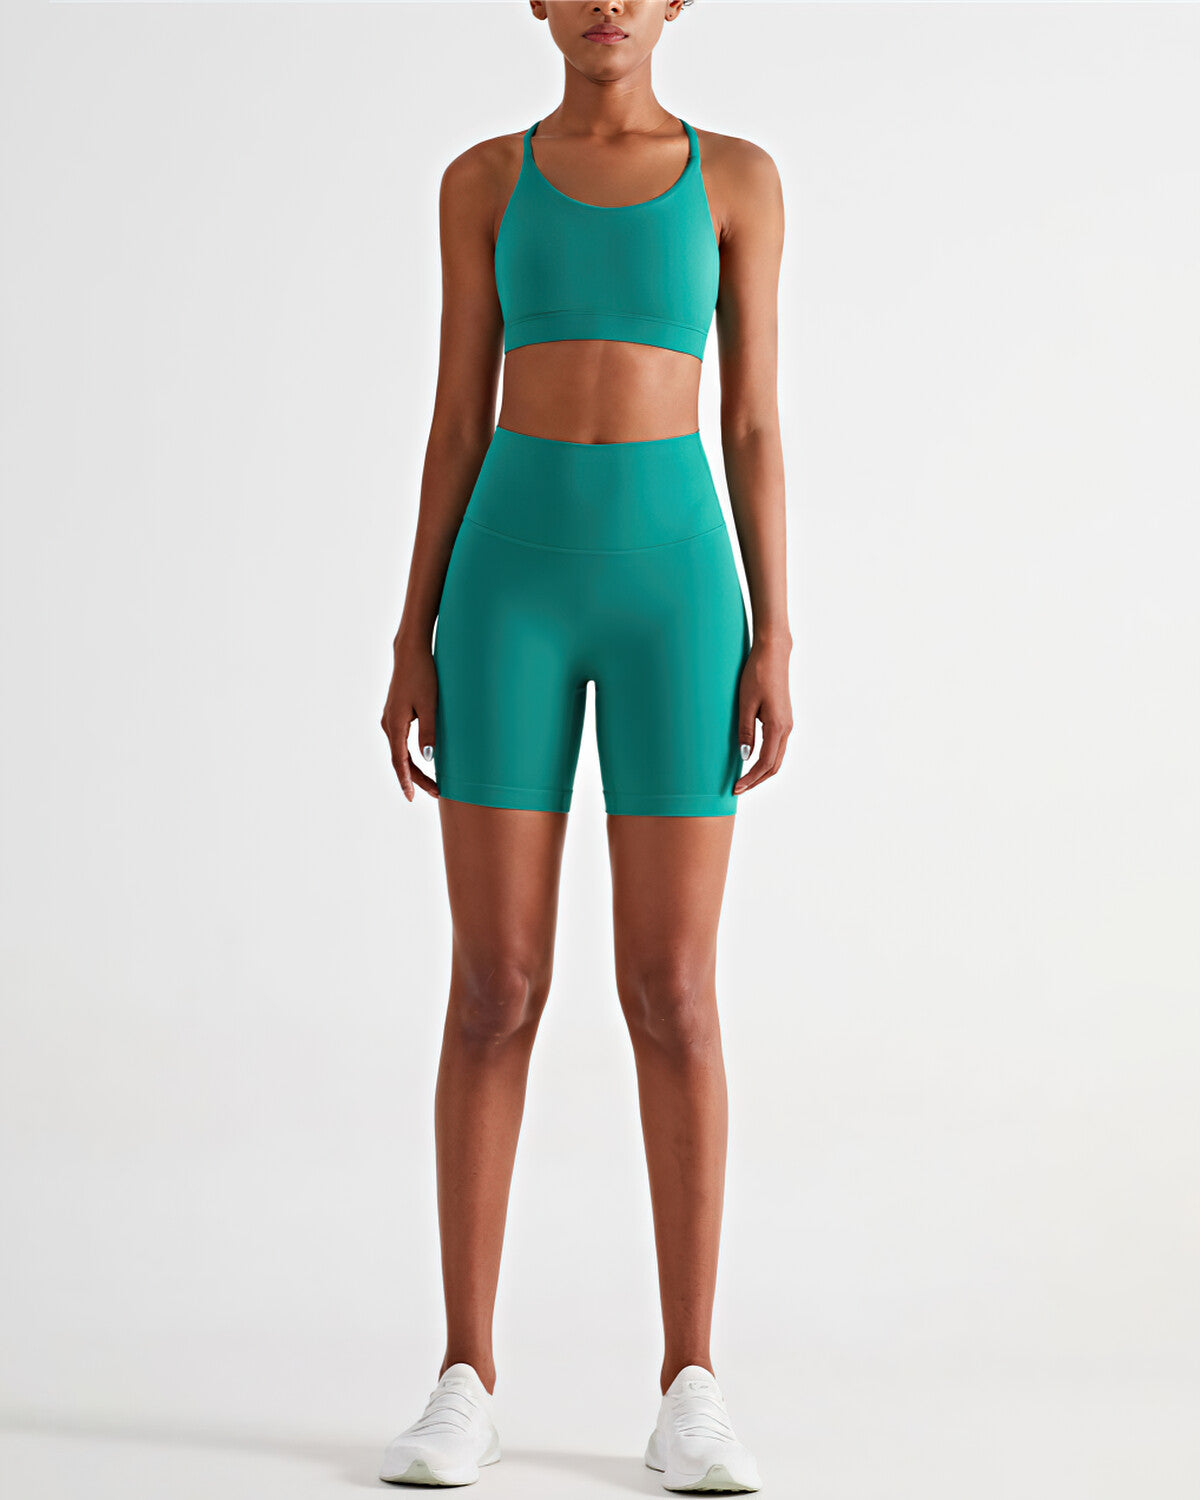 Lillie Seamless Shorts - Teal